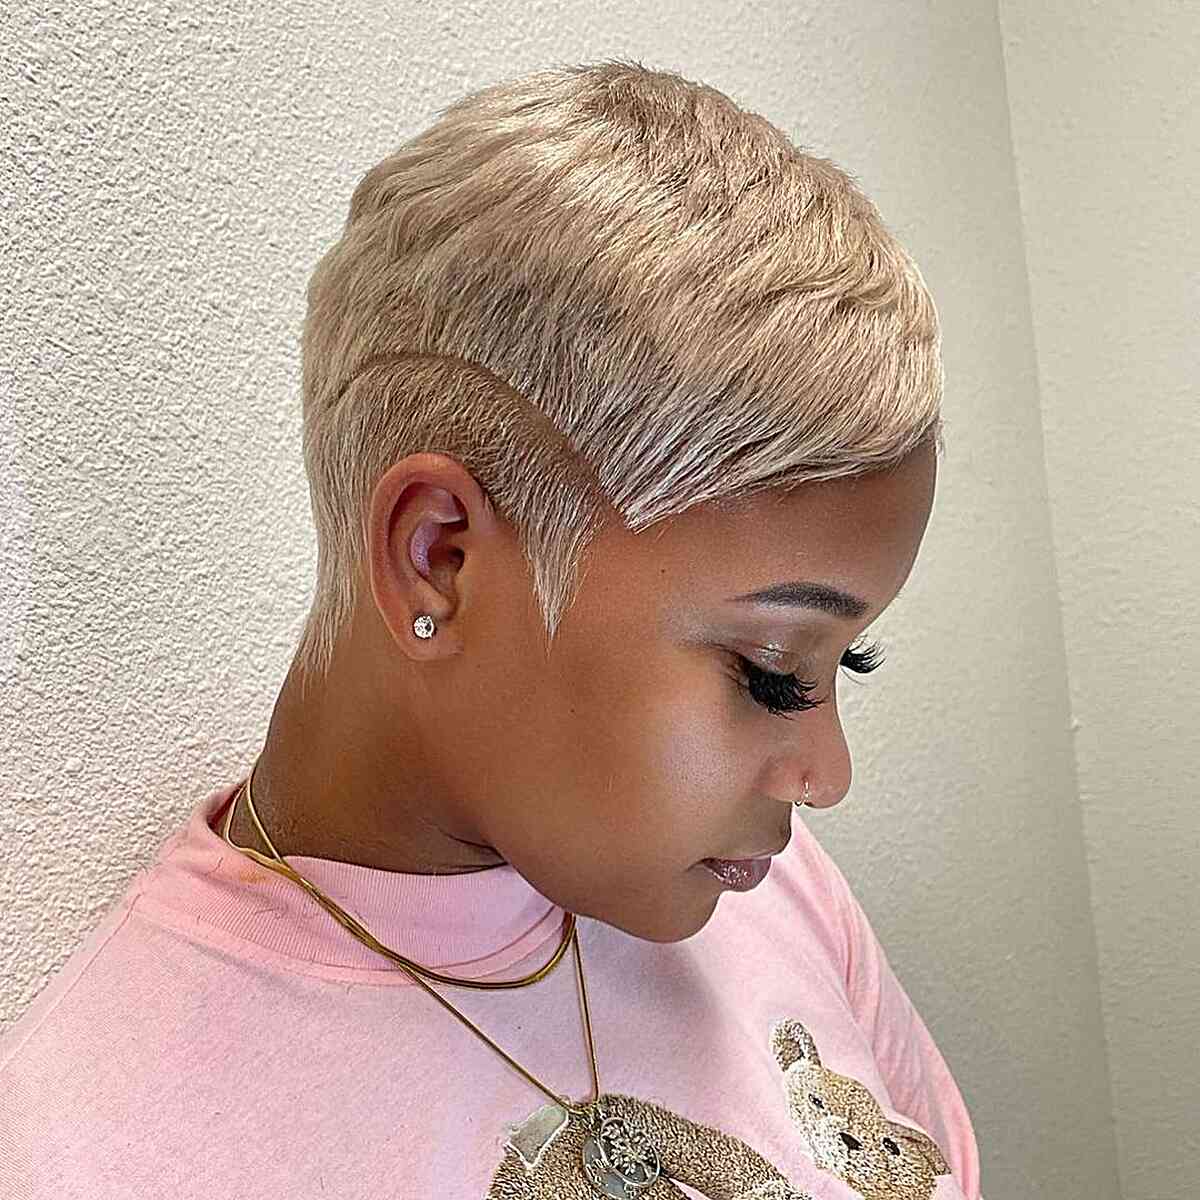 A women with short gold pixie haircut